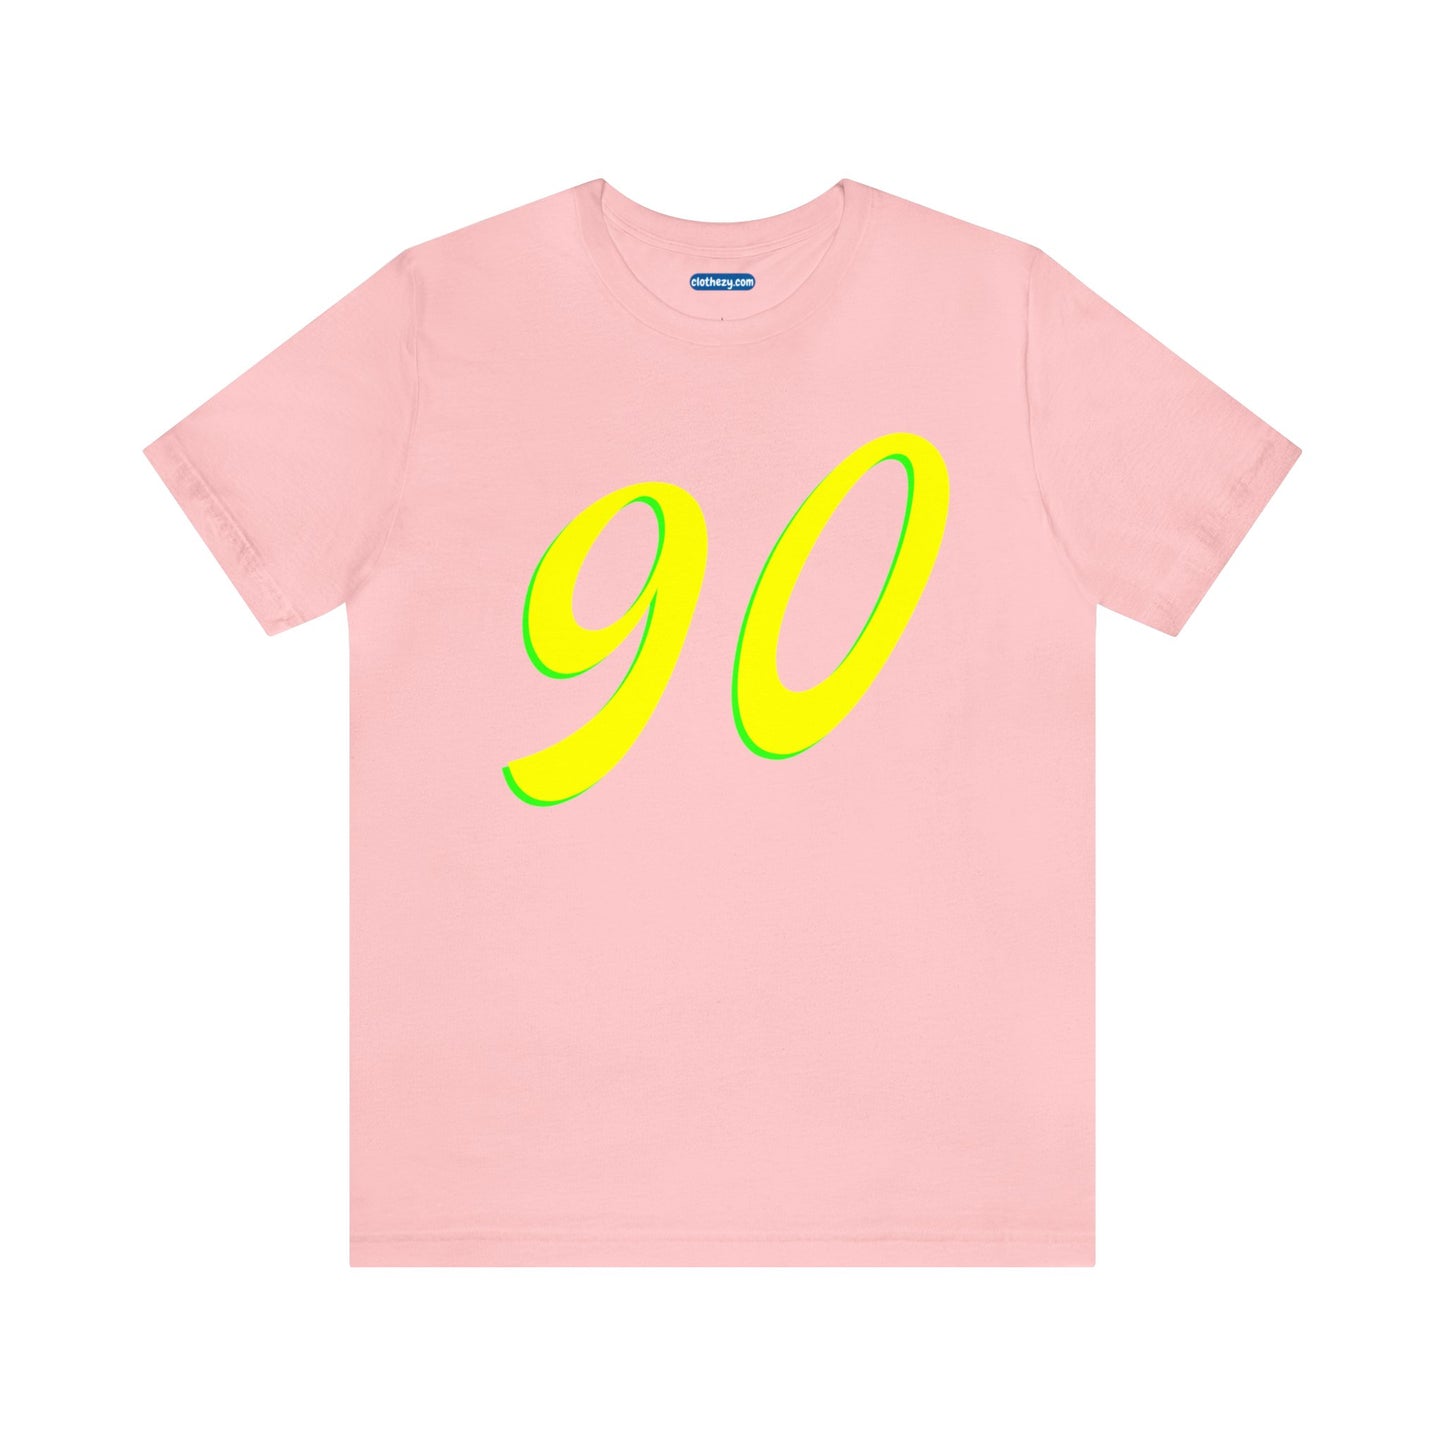 Number 90 Design - Soft Cotton Tee for birthdays and celebrations, Gift for friends and family, Multiple Options by clothezy.com in Red Size Small - Buy Now